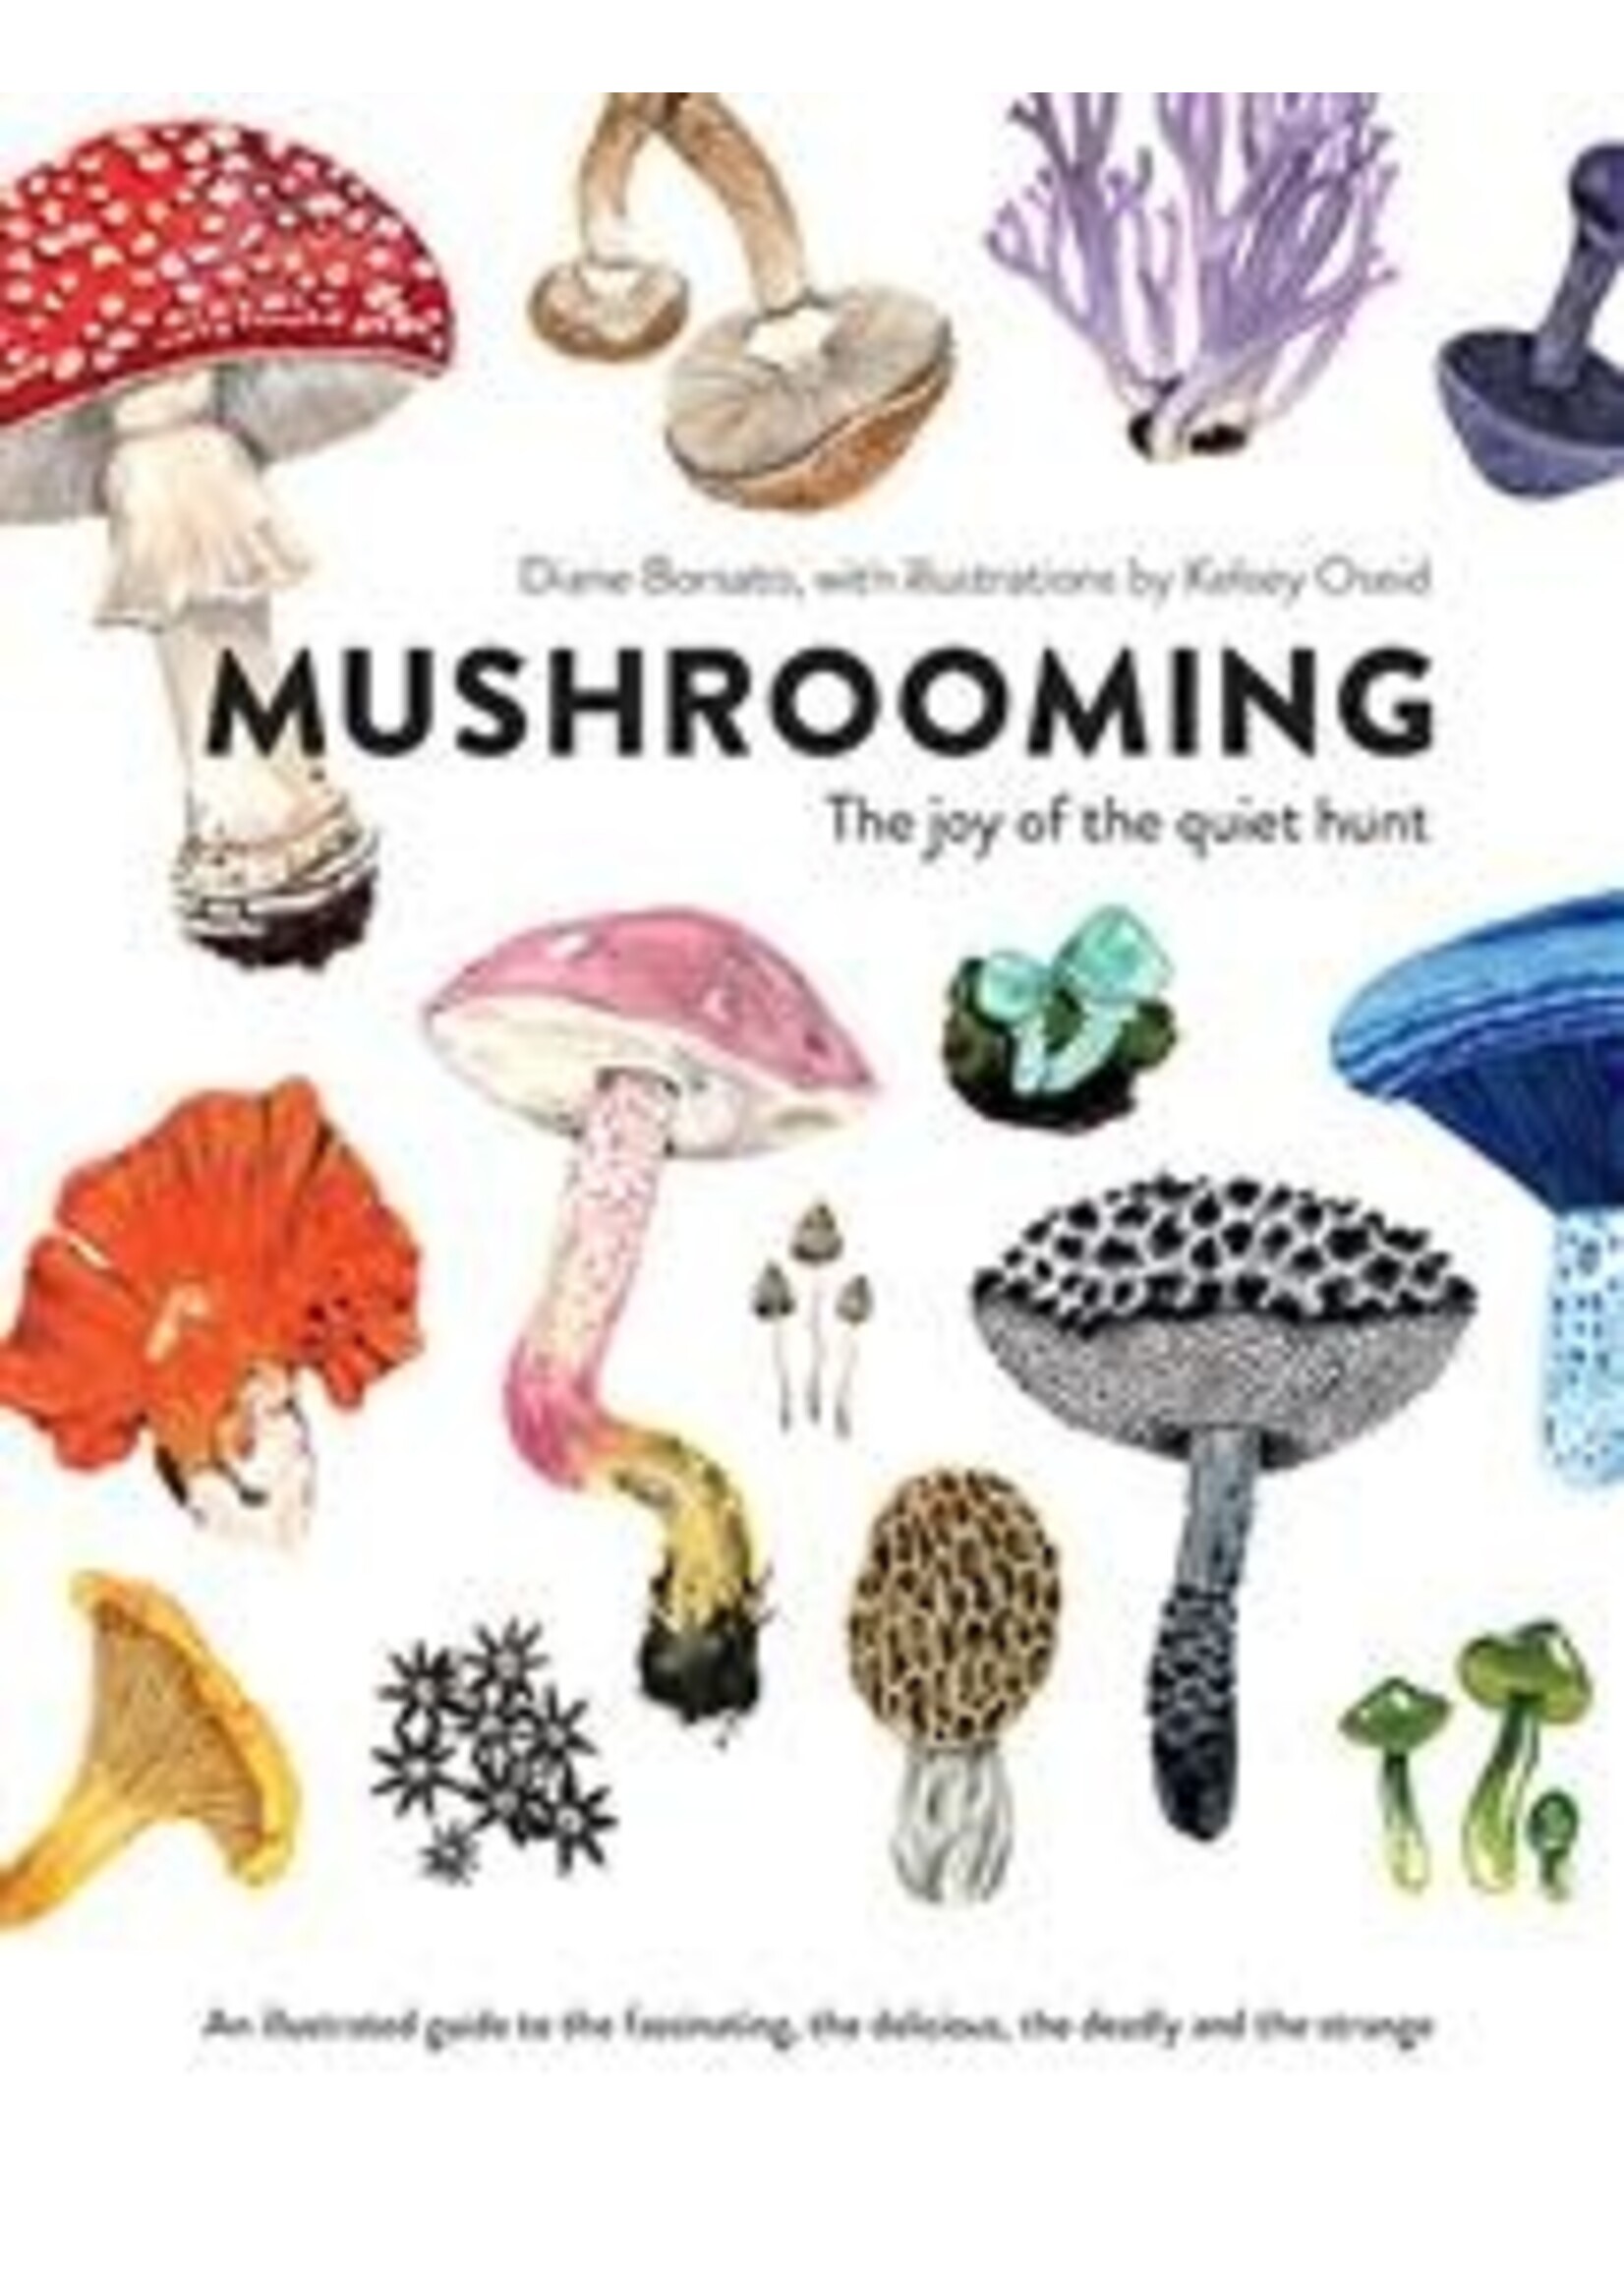 Mushrooming: The Joy of the Quiet Hunt – An Illustrated Guide to the Fascinating, the Delicious, the Deadly and the Strange by Diane Borsato, Kelsey Oseid